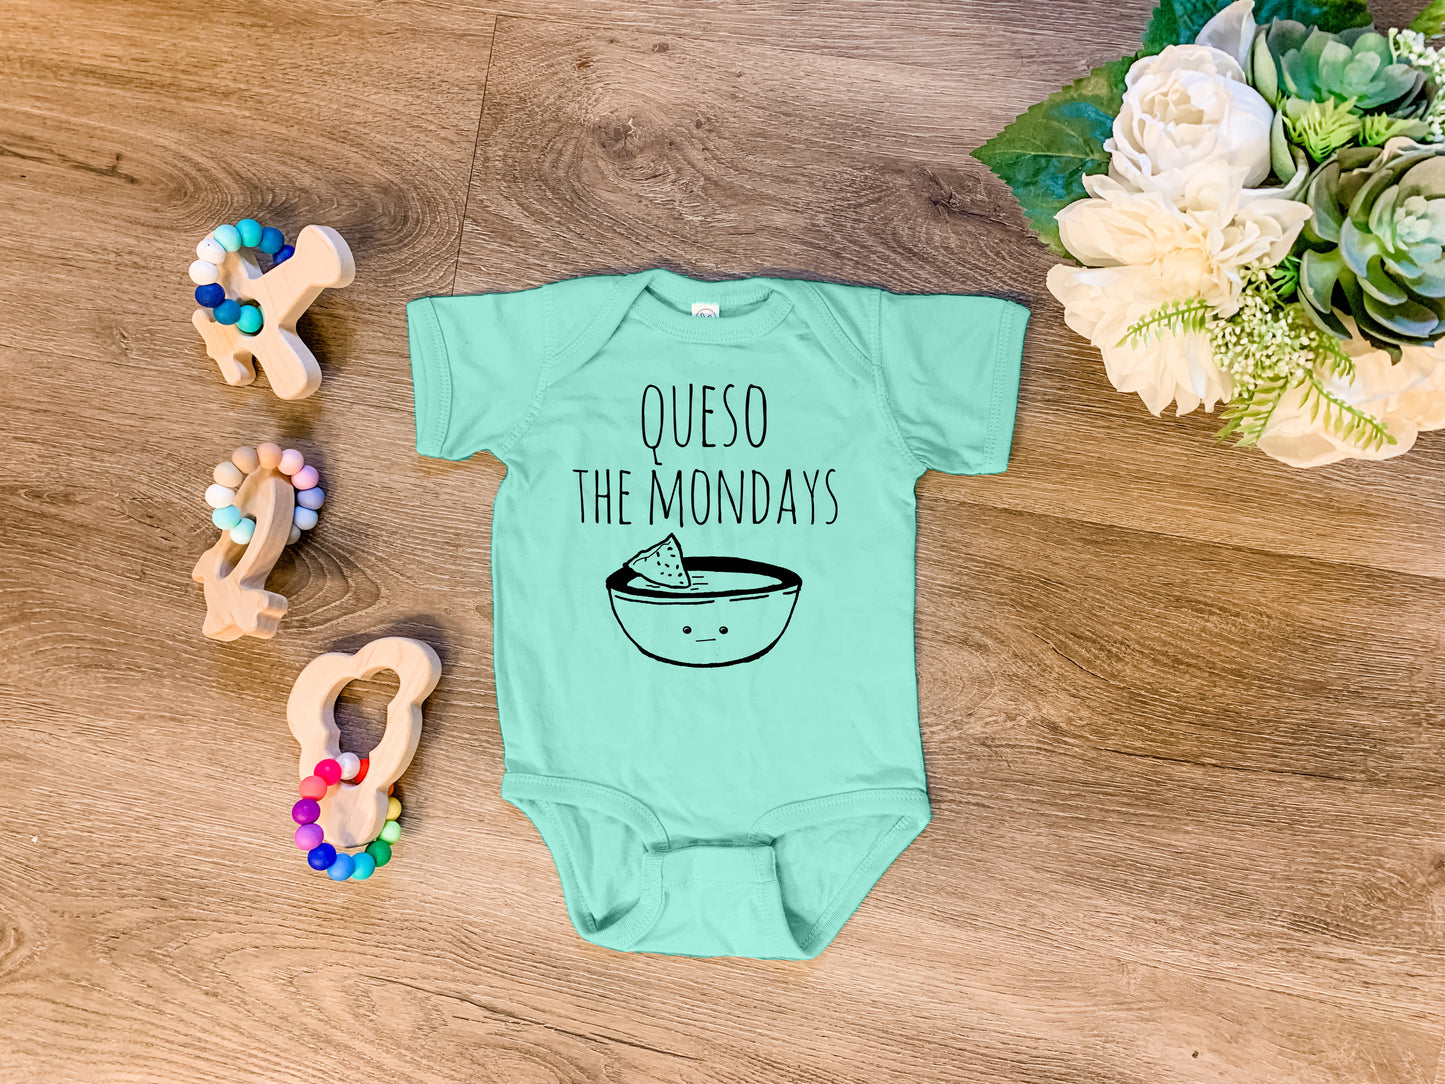 Queso The Mondays (Tacos) - Onesie - Heather Gray, Chill, or Lavender